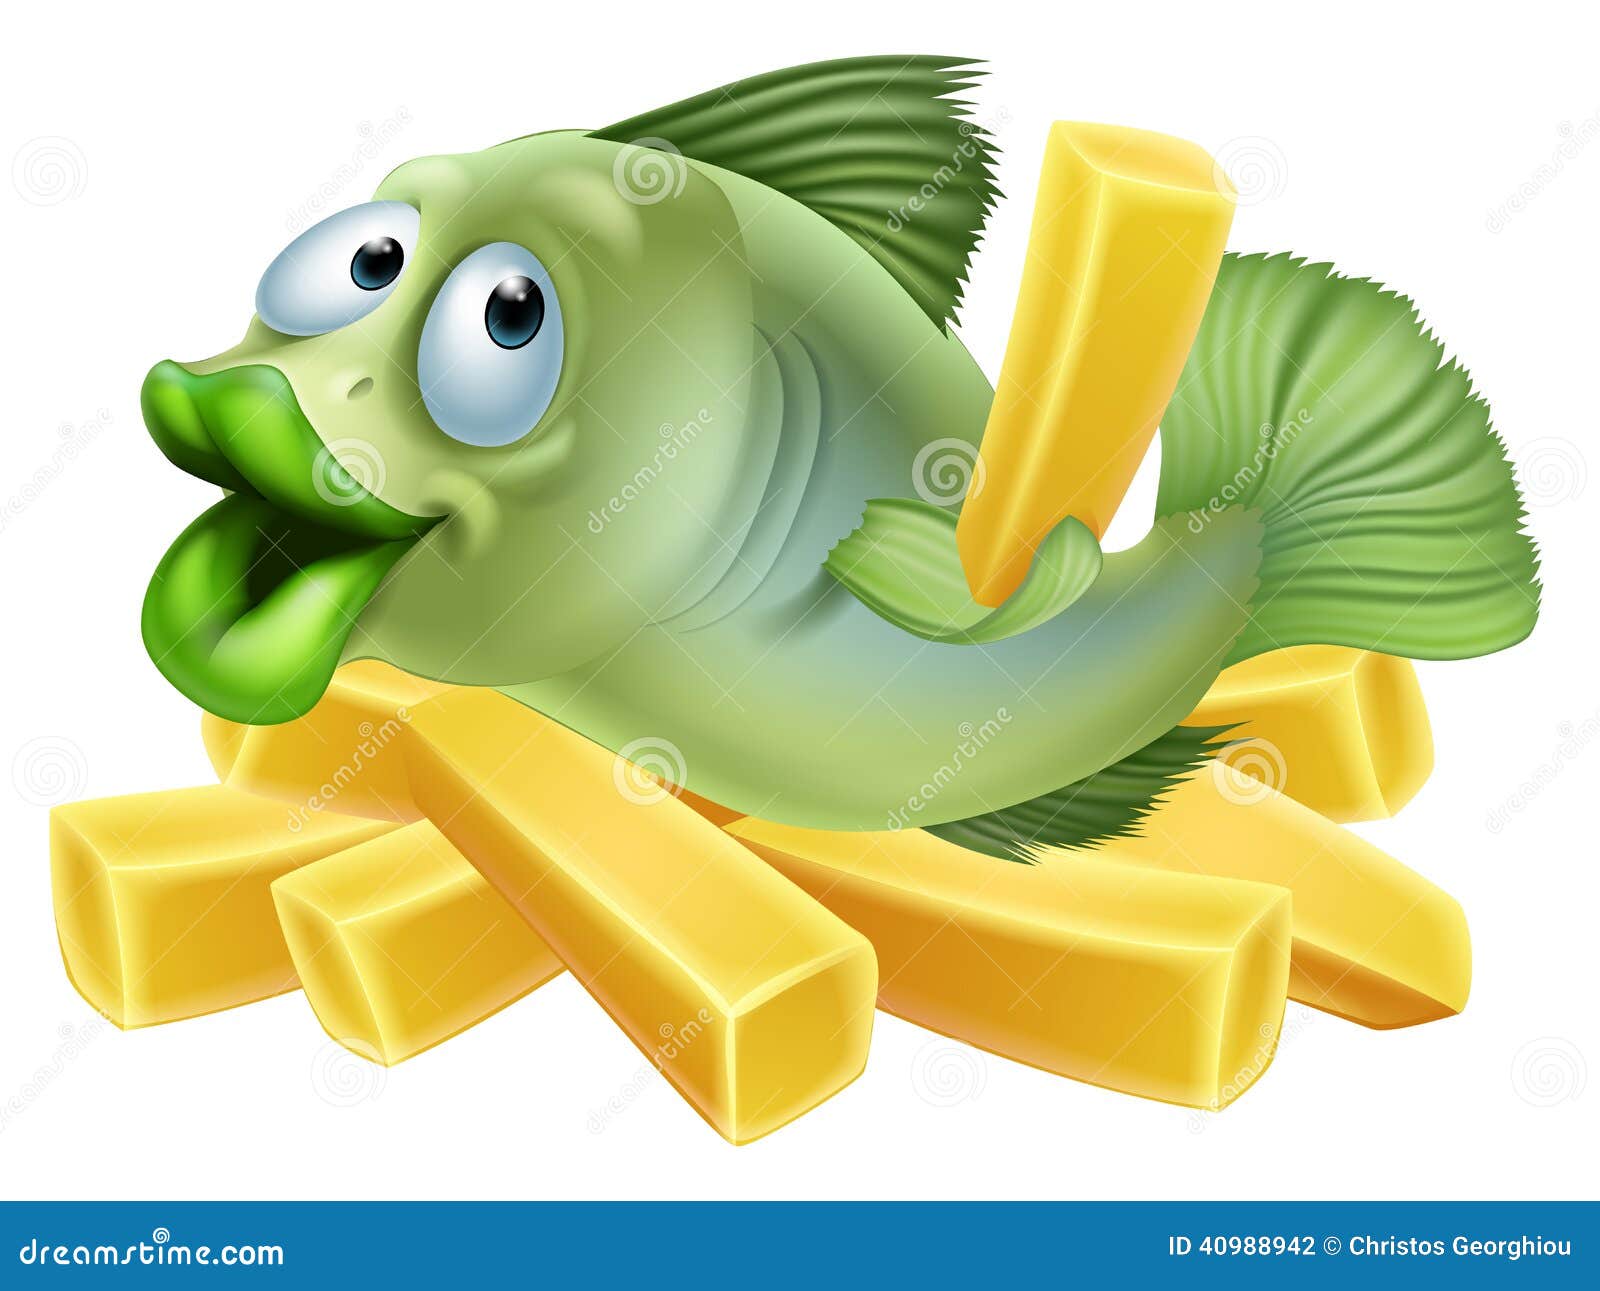 clipart of fish and chips - photo #12